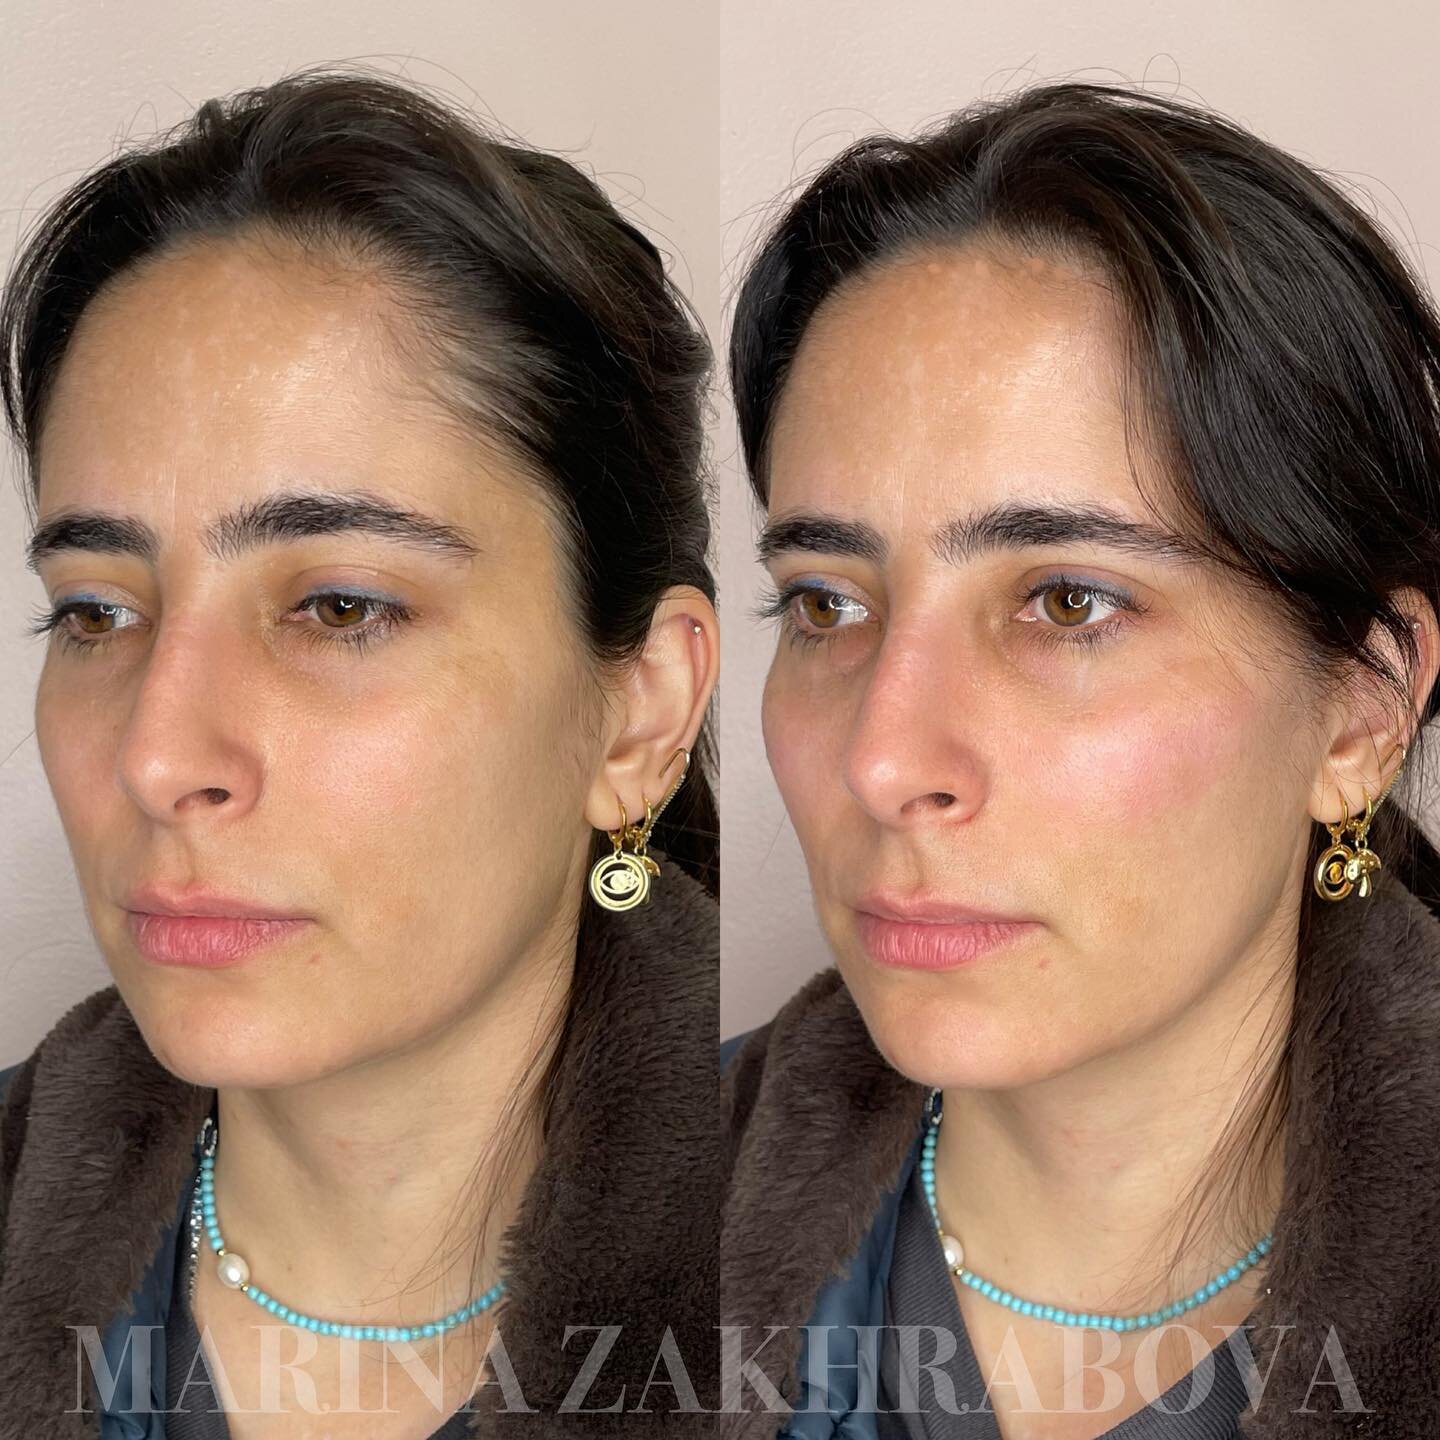 CHEEK FILLER with Juvederm Voluma 💉

As we age, our skin loses elasticity and volume, resulting in a sunken or hollow appearance, especially in areas like the midface. Cheek fillers can help to restore volume, giving the face a more youthful and ref